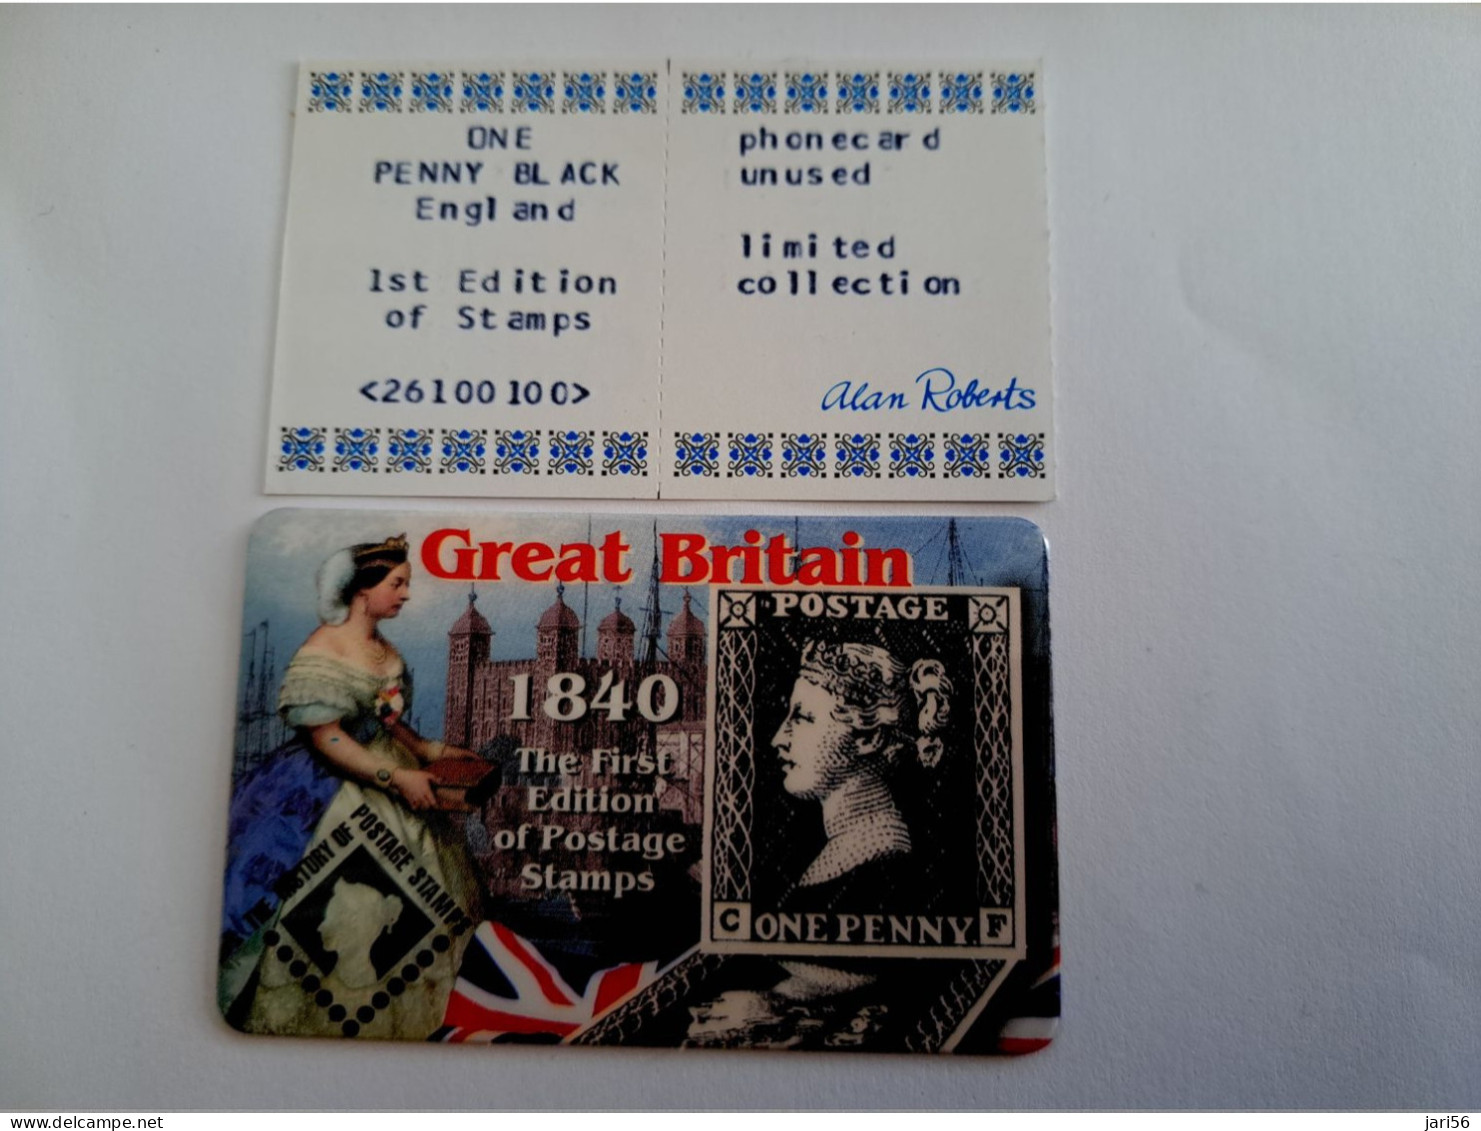 GREAT BRITAIN /20 UNITS / PENNY BLACK  1840 / DATE 06/2002     /    PREPAID CARD / LIMITED EDITION/ MINT  **15703** - [10] Colecciones